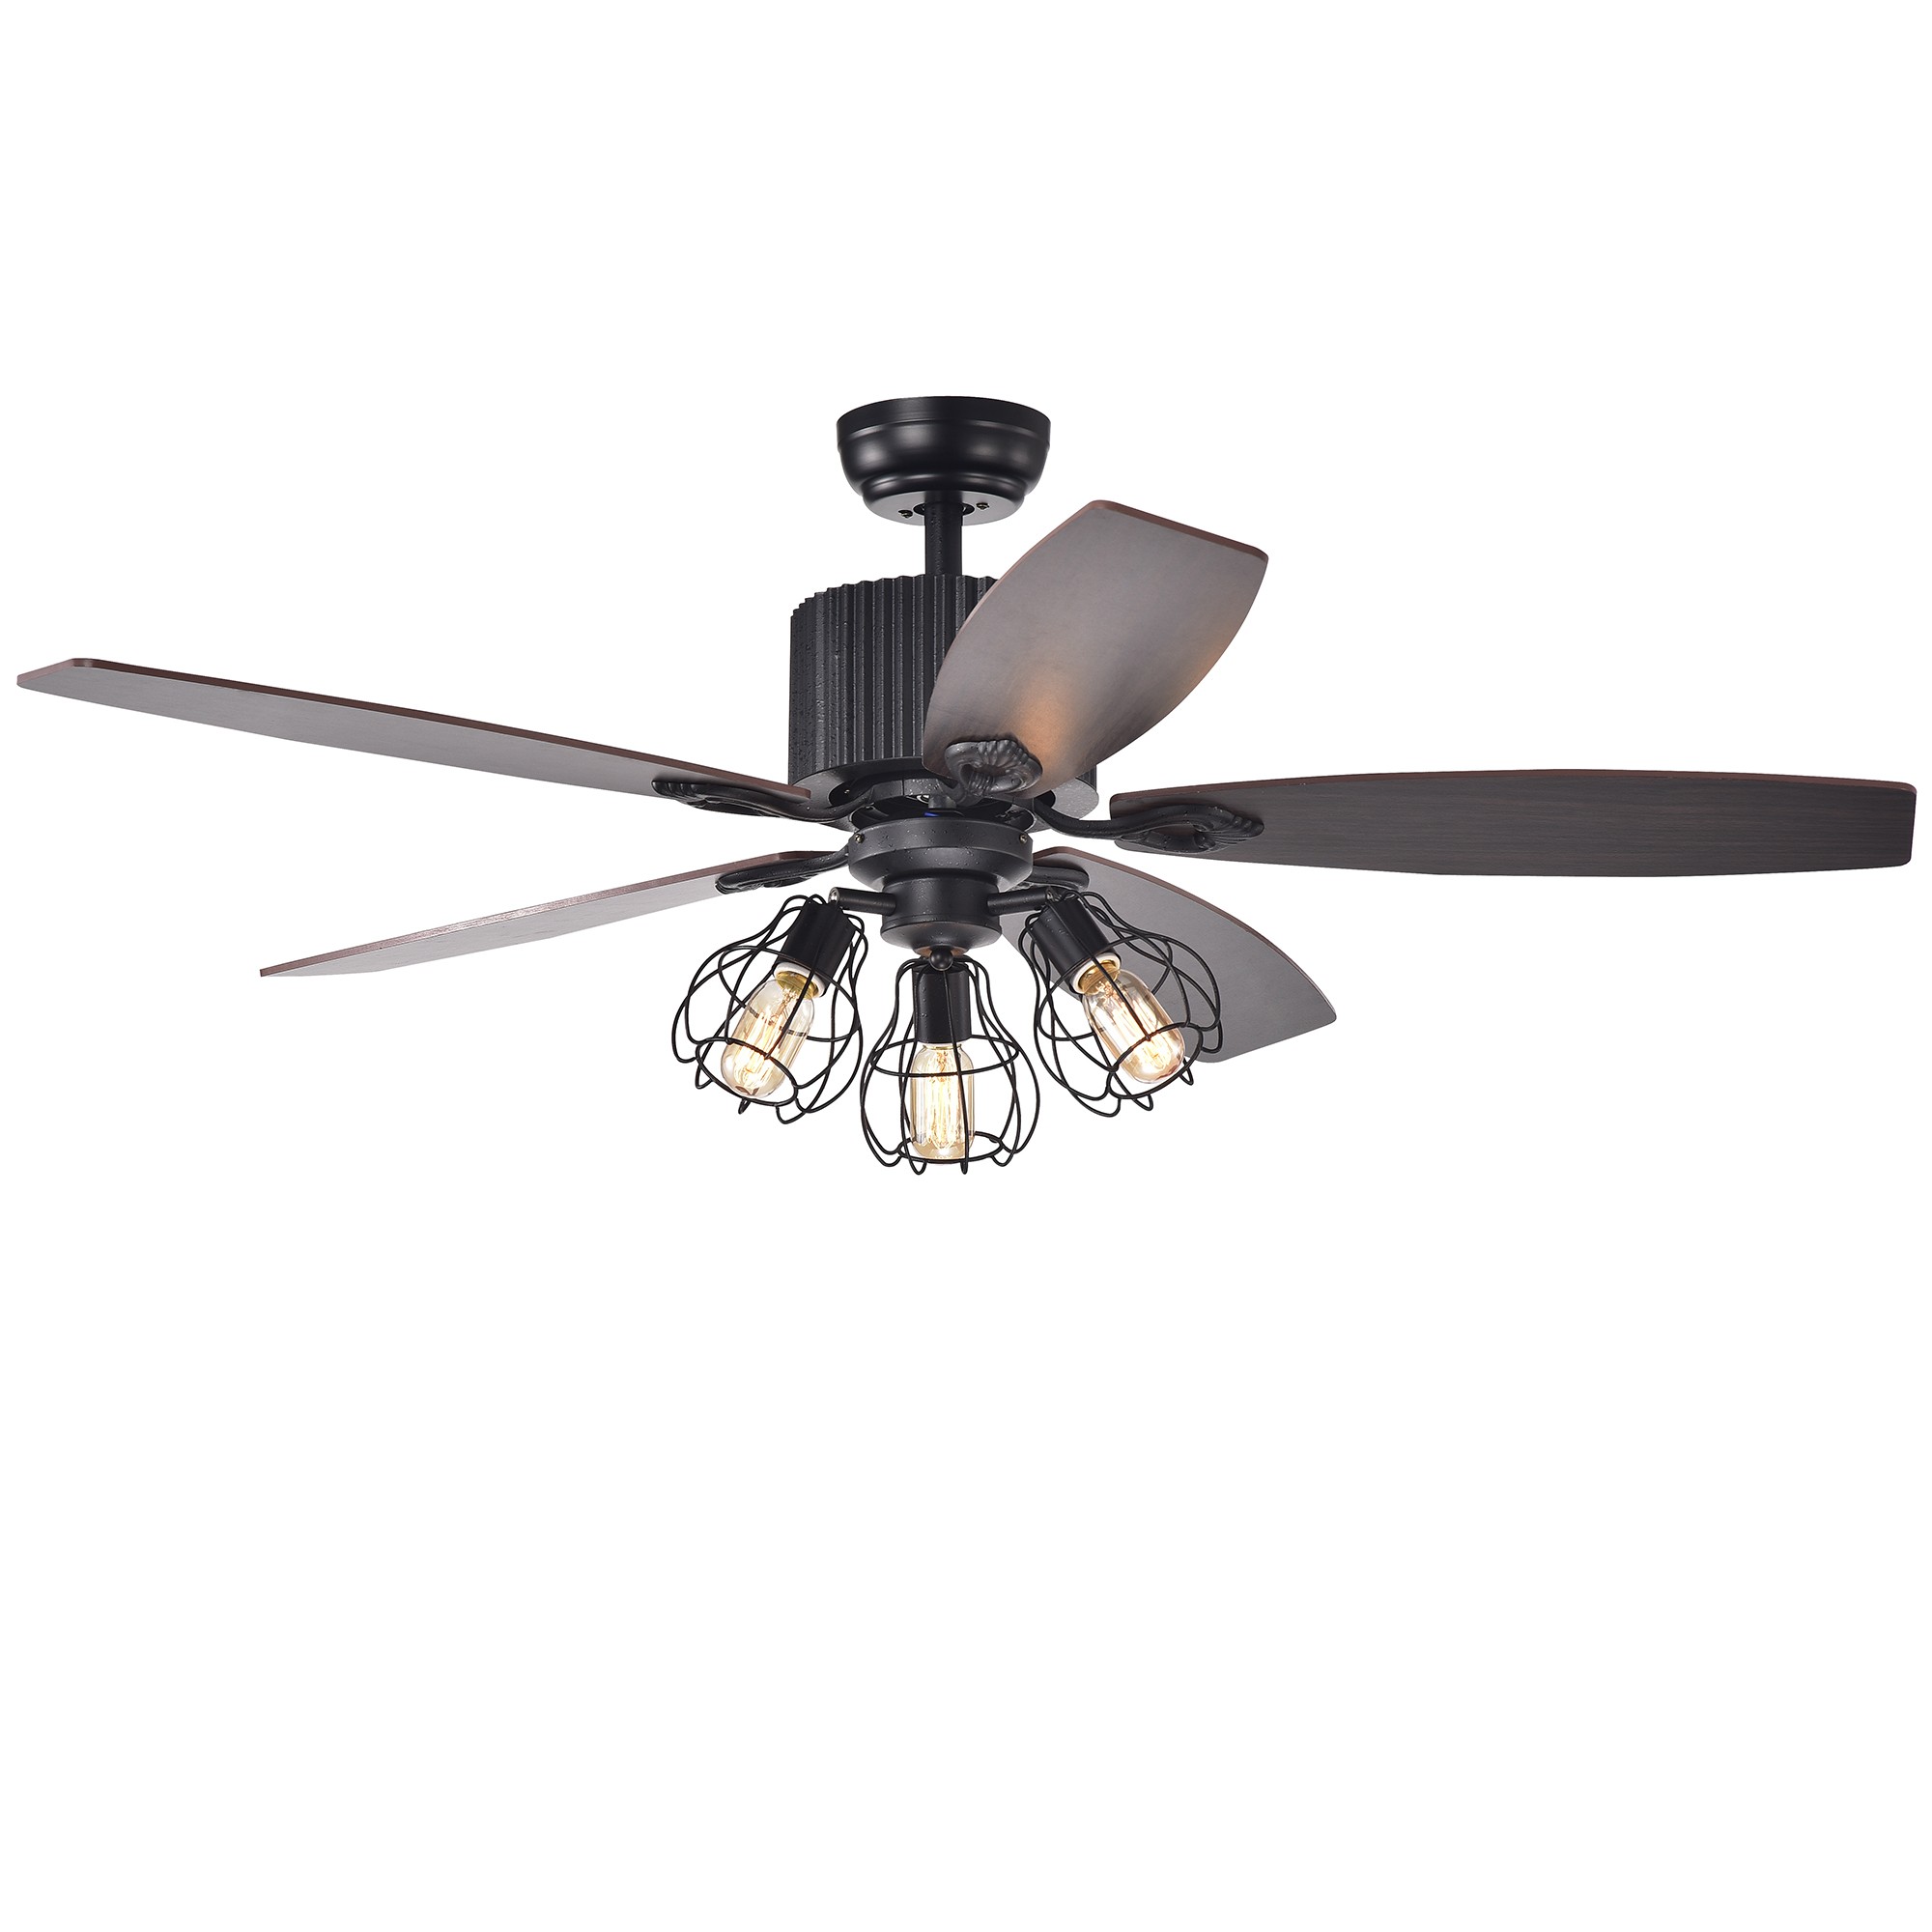 Cornelius Forged Black 3-Light 52-Inch Lighted Ceiling Fan (incl. Remote & 2 Color Option Blades)